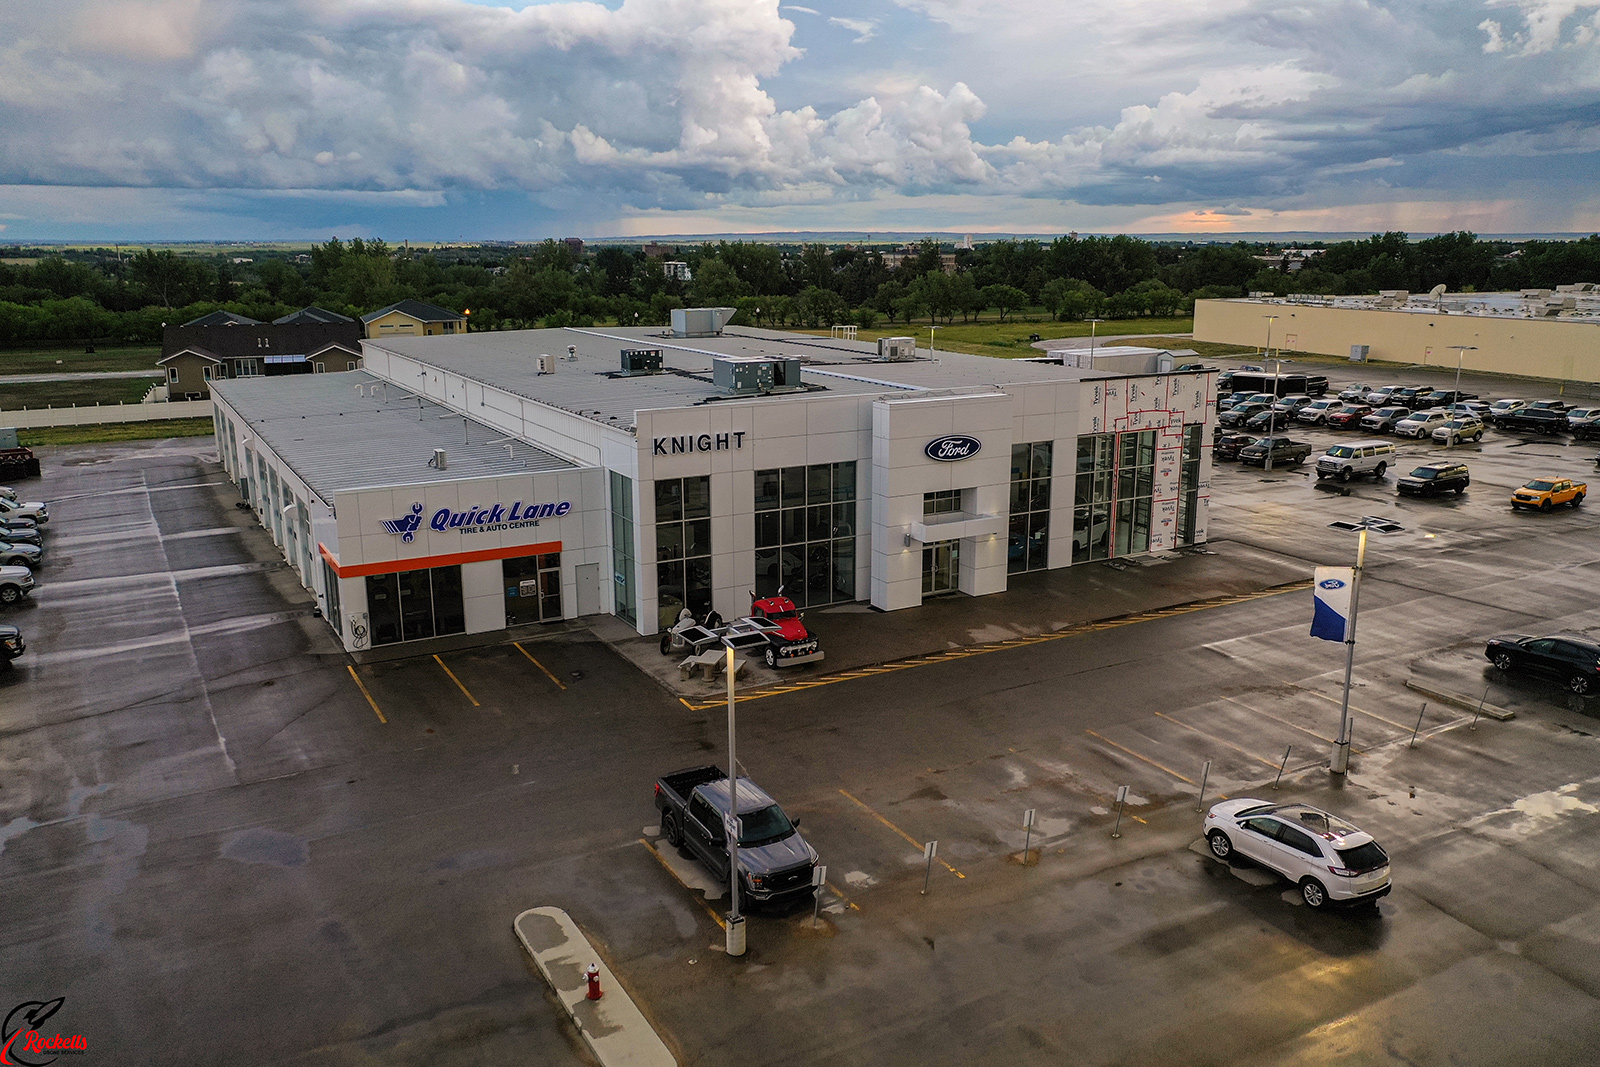 Commercial real estate drone photography in Saskatchewan